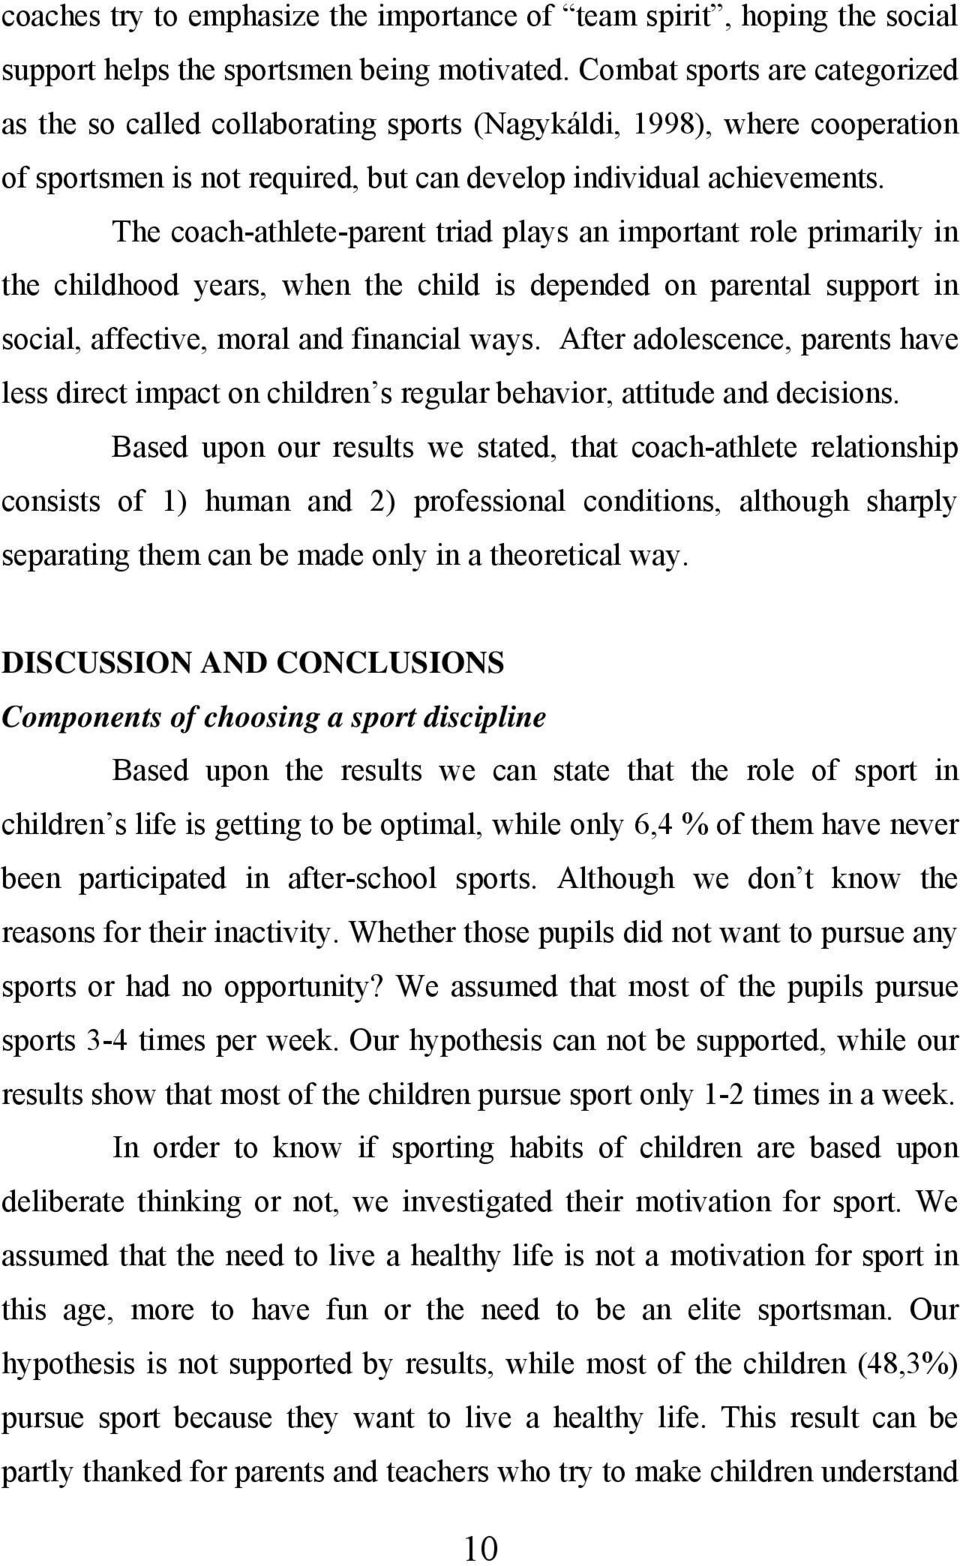 The coach-athlete-parent triad plays an important role primarily in the childhood years, when the child is depended on parental support in social, affective, moral and financial ways.